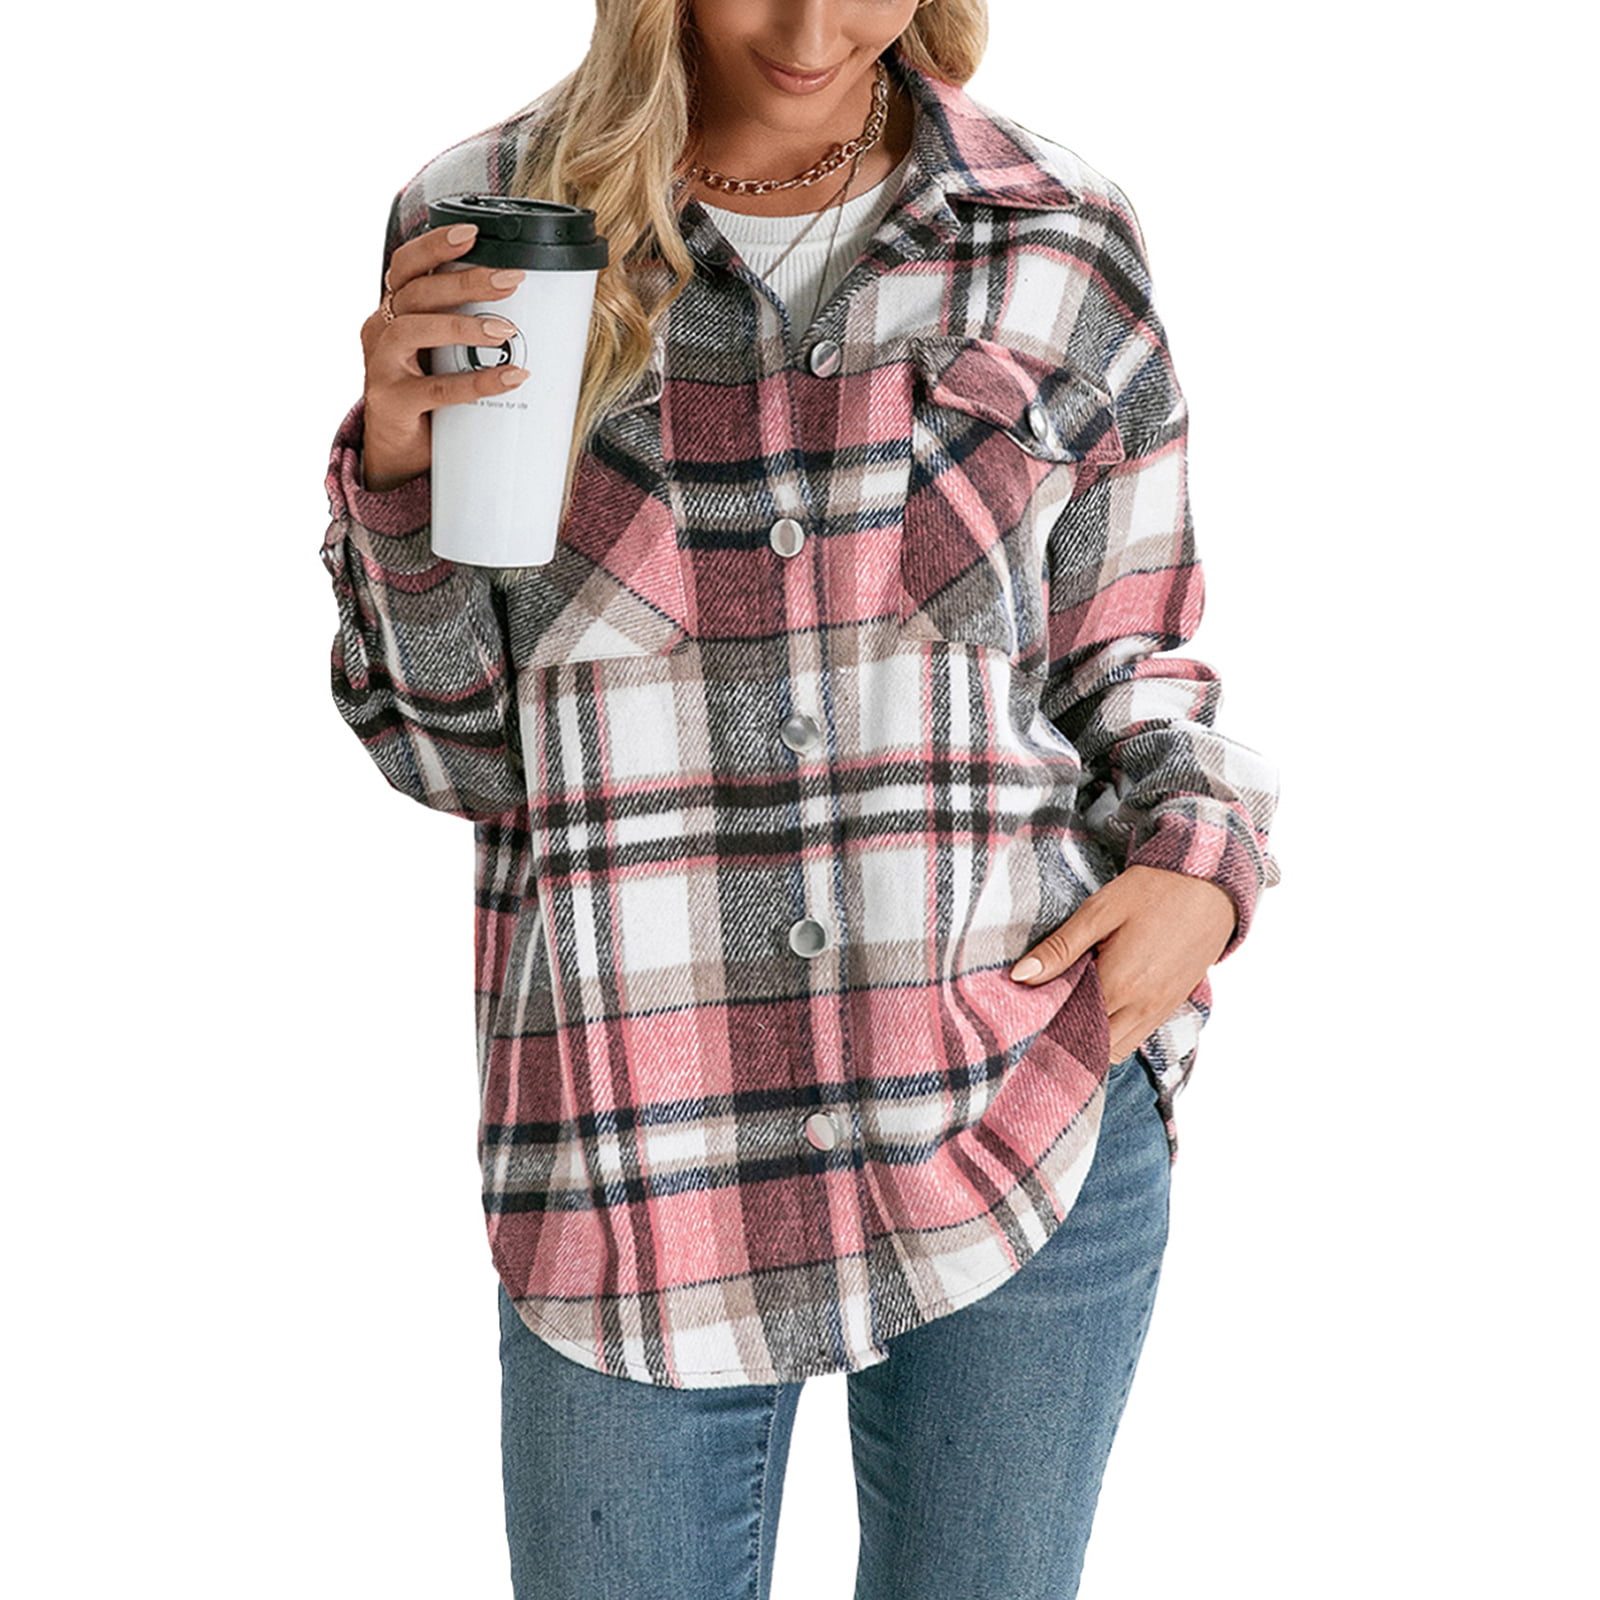 Womens Plaid Jacket Long Sleeve Lapel Button-Down Shirts Wool Blend Shacket Coat Casual Tops Outwear with Pocket 